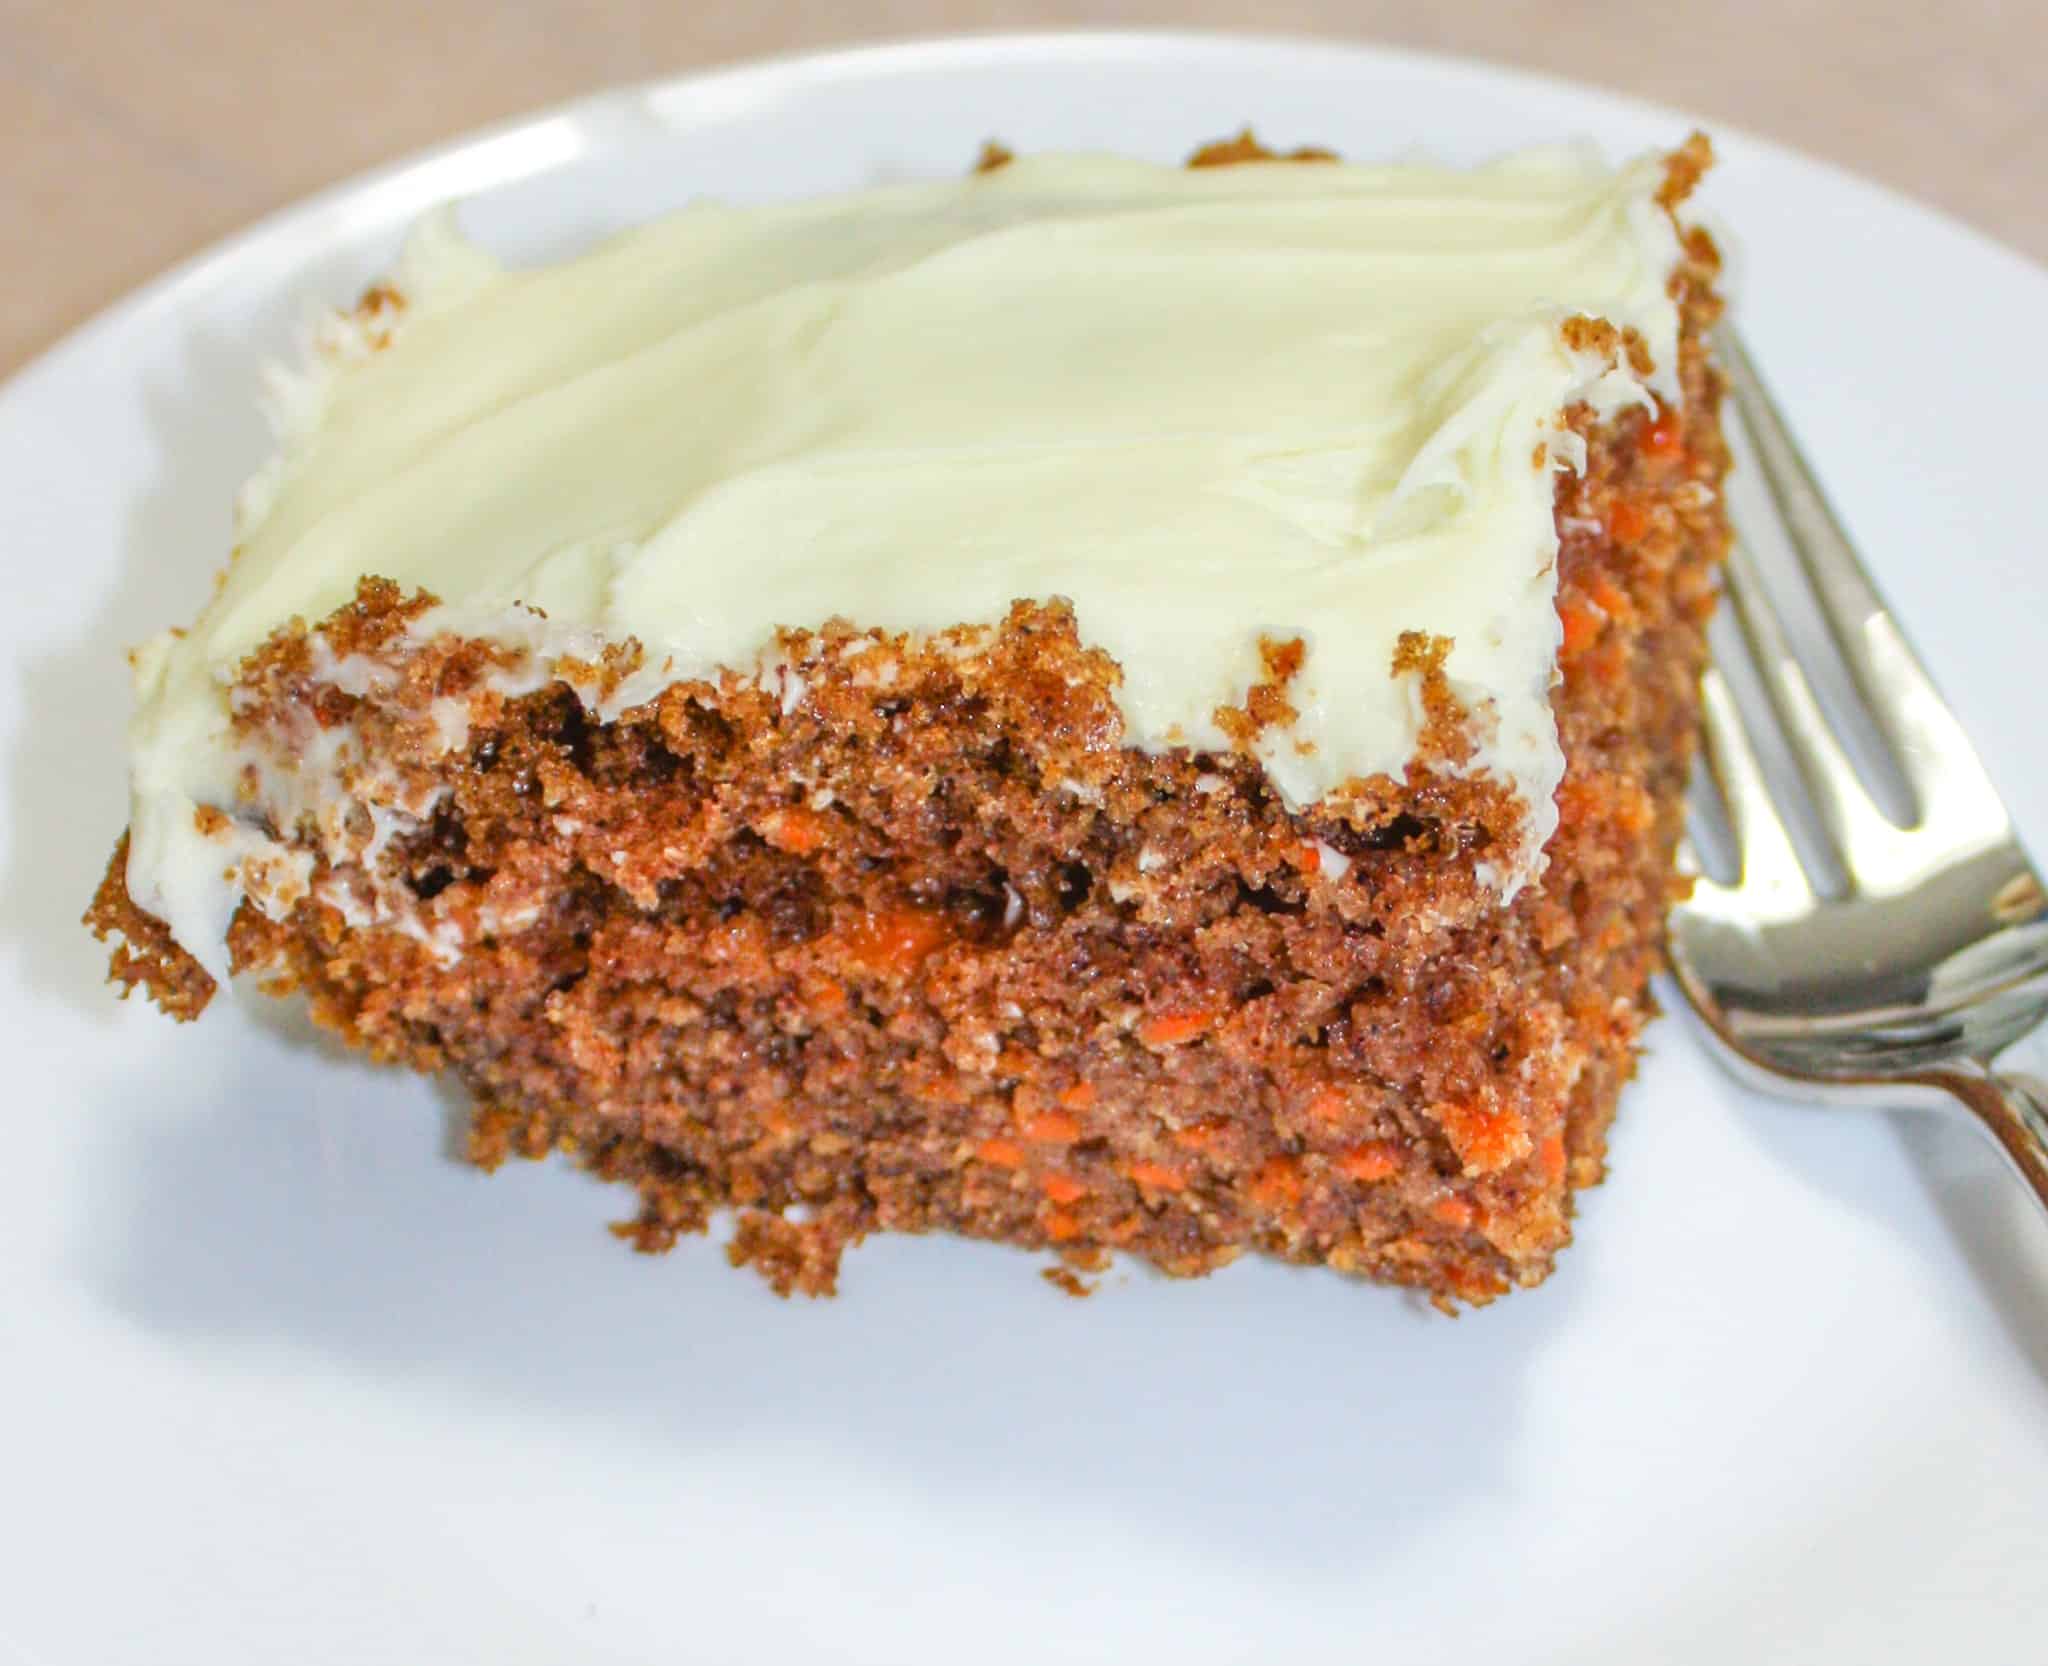 Carrot Cake is one of my all time favourites and this recipe will please everyone not just those that have to eat gluten free.